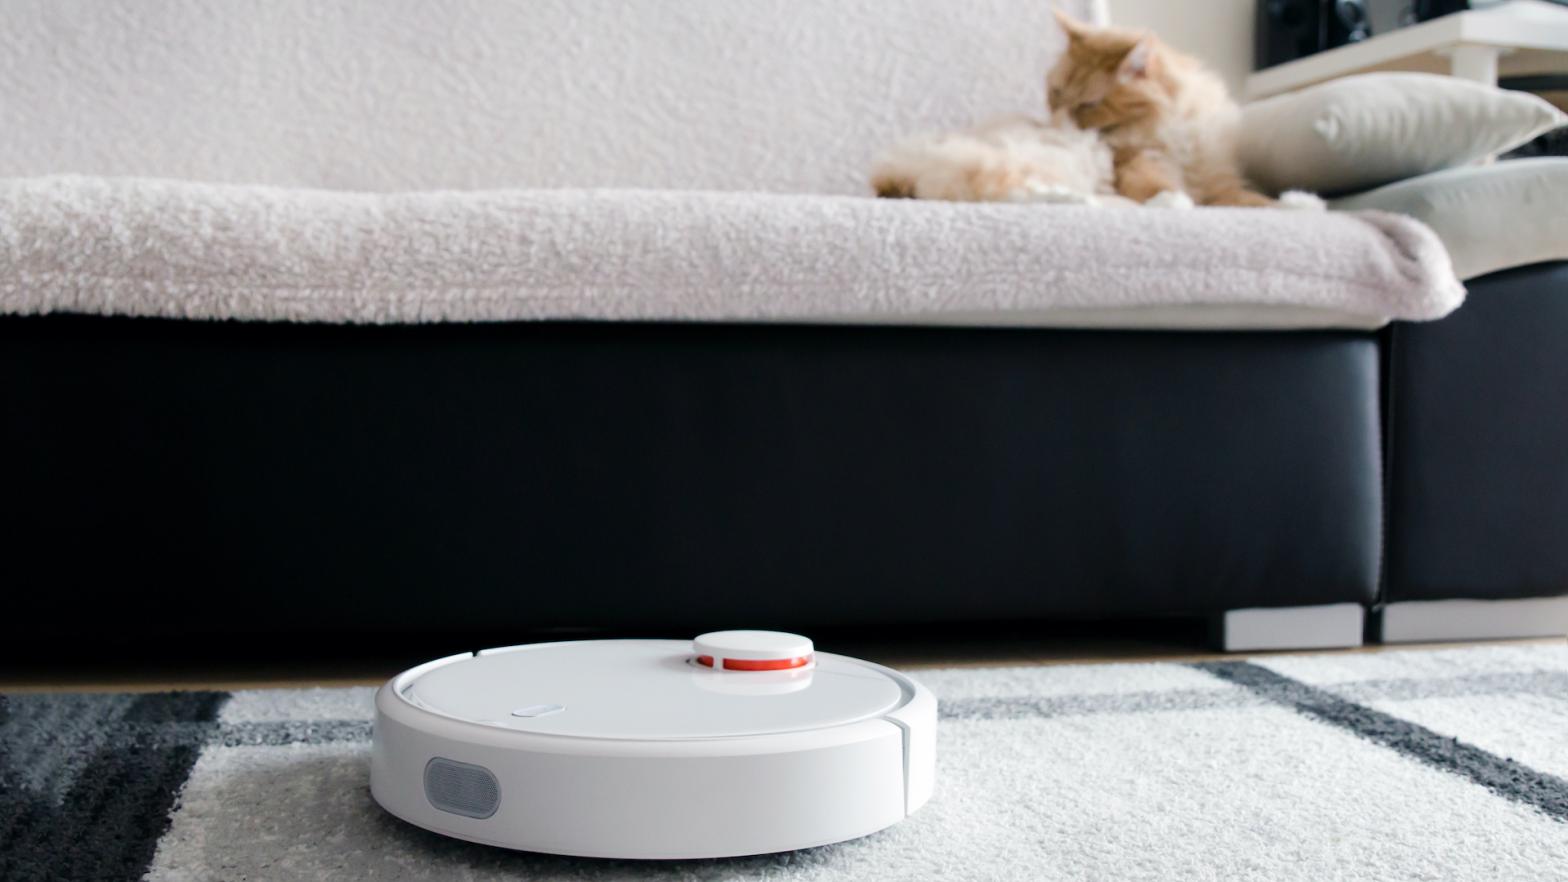 4 Ways to Get the Most Out of Your Robot Vacuum